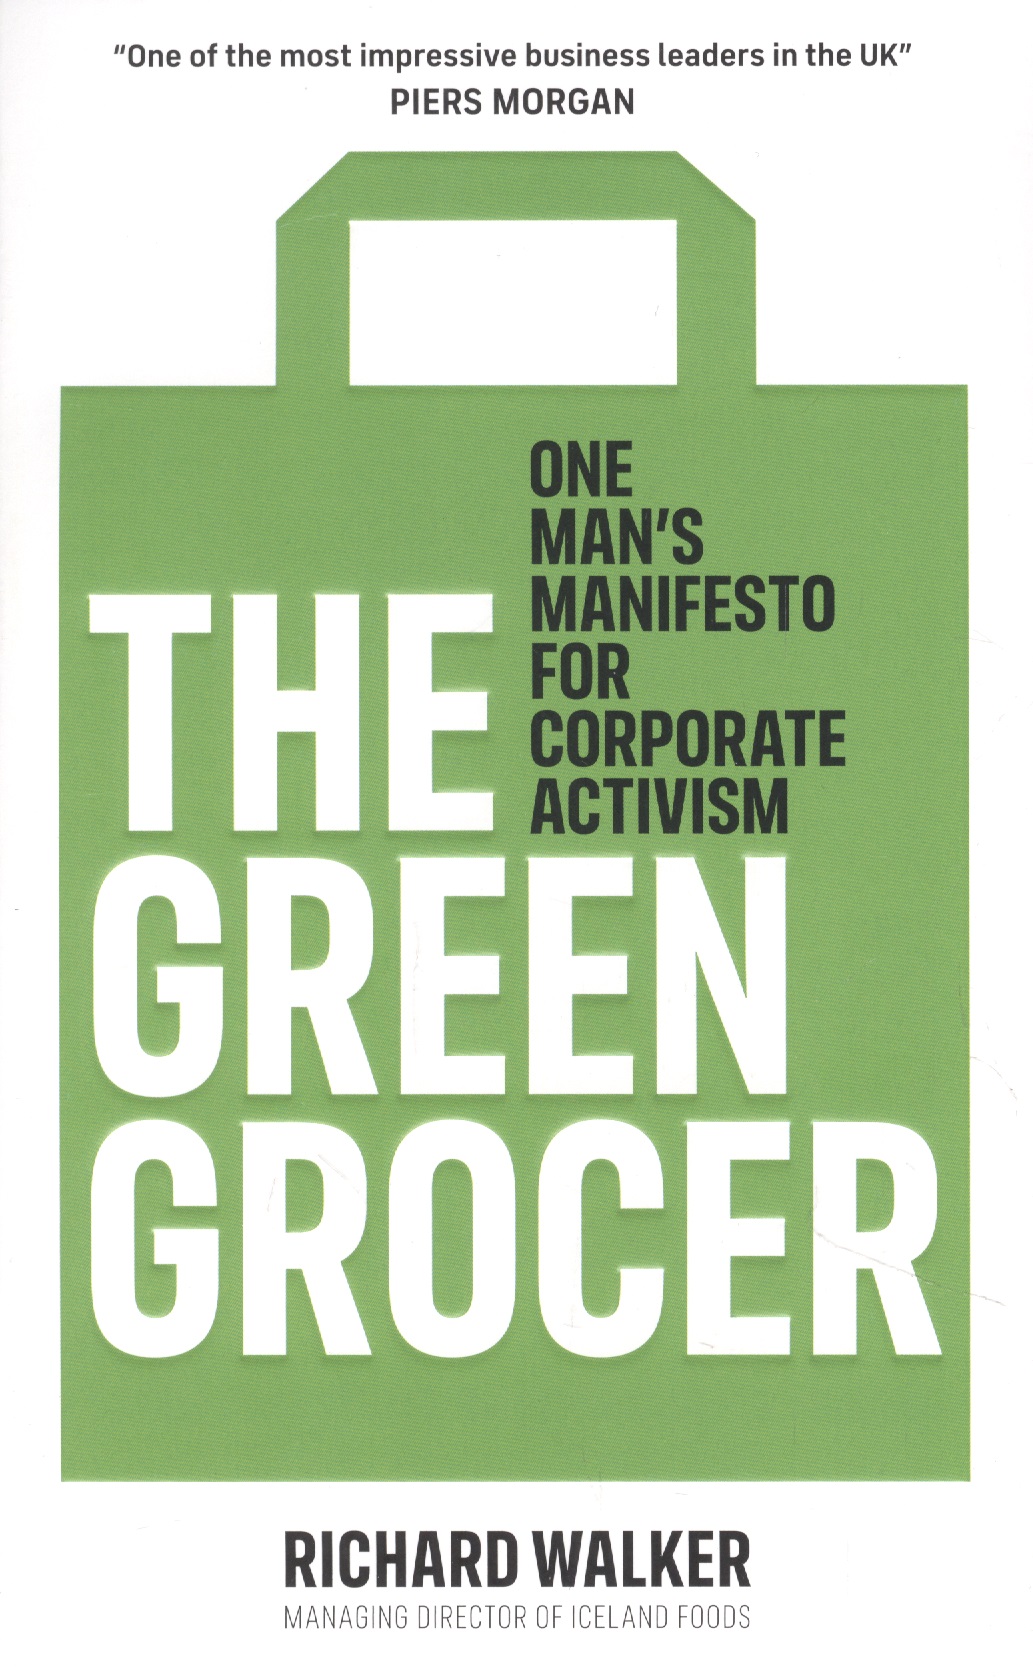 The Green Grocer. One Mans Manifesto for Corporate Activism carvill michelle butler gemma evans geraint sustainable marketing how to drive profits with purpose